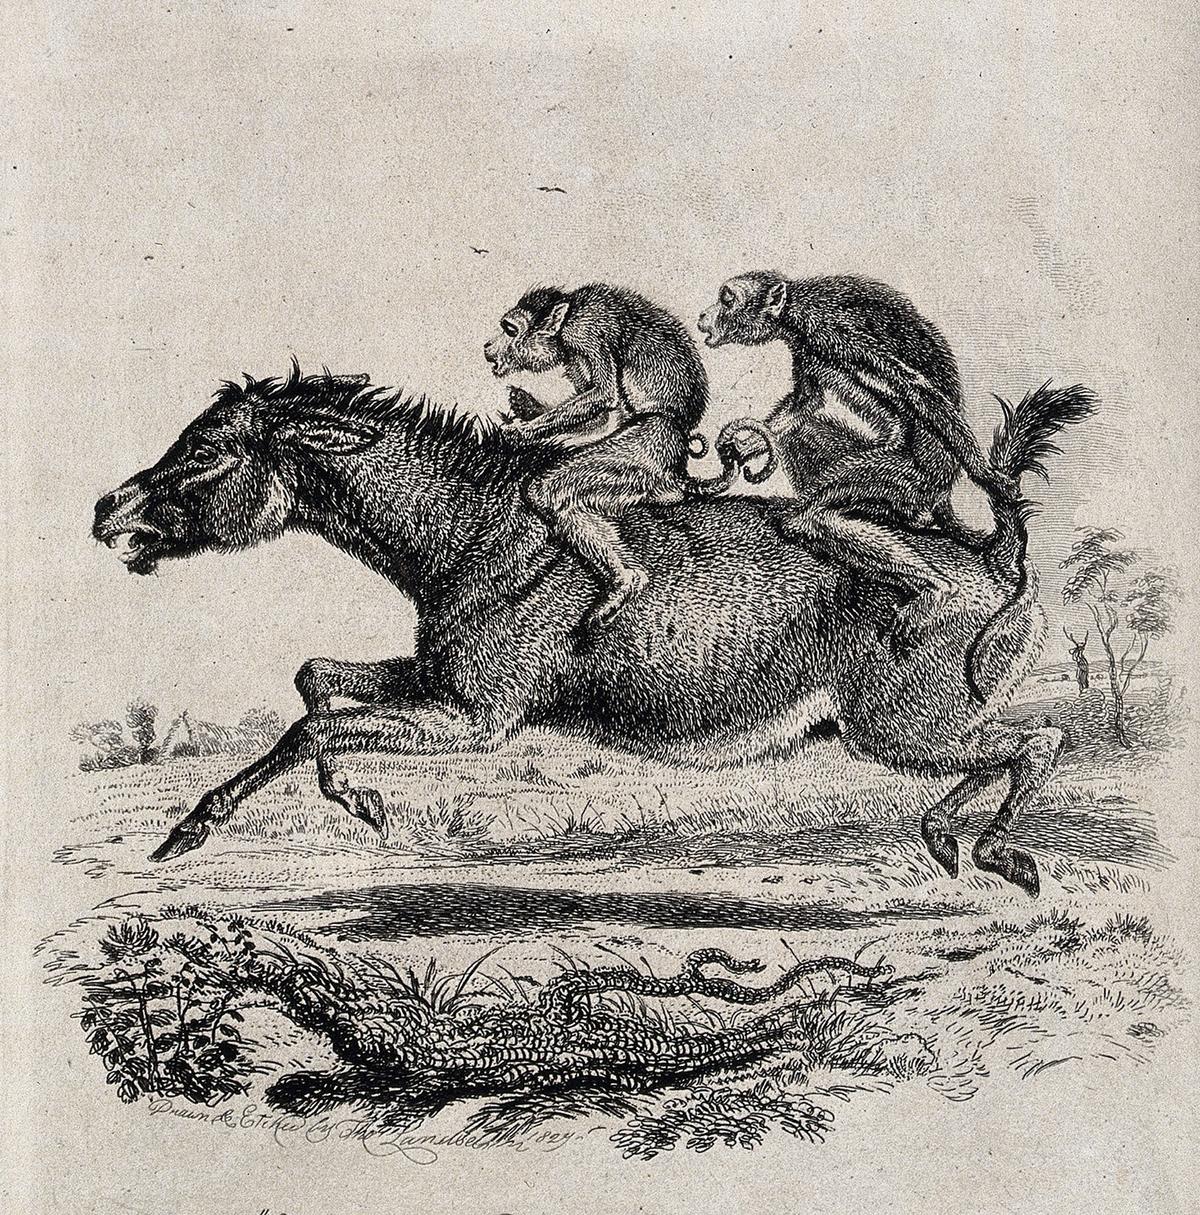 An etching of two monkeys riding a terrified donkey, 1827, by Thomas Landseer. (Public Domain)